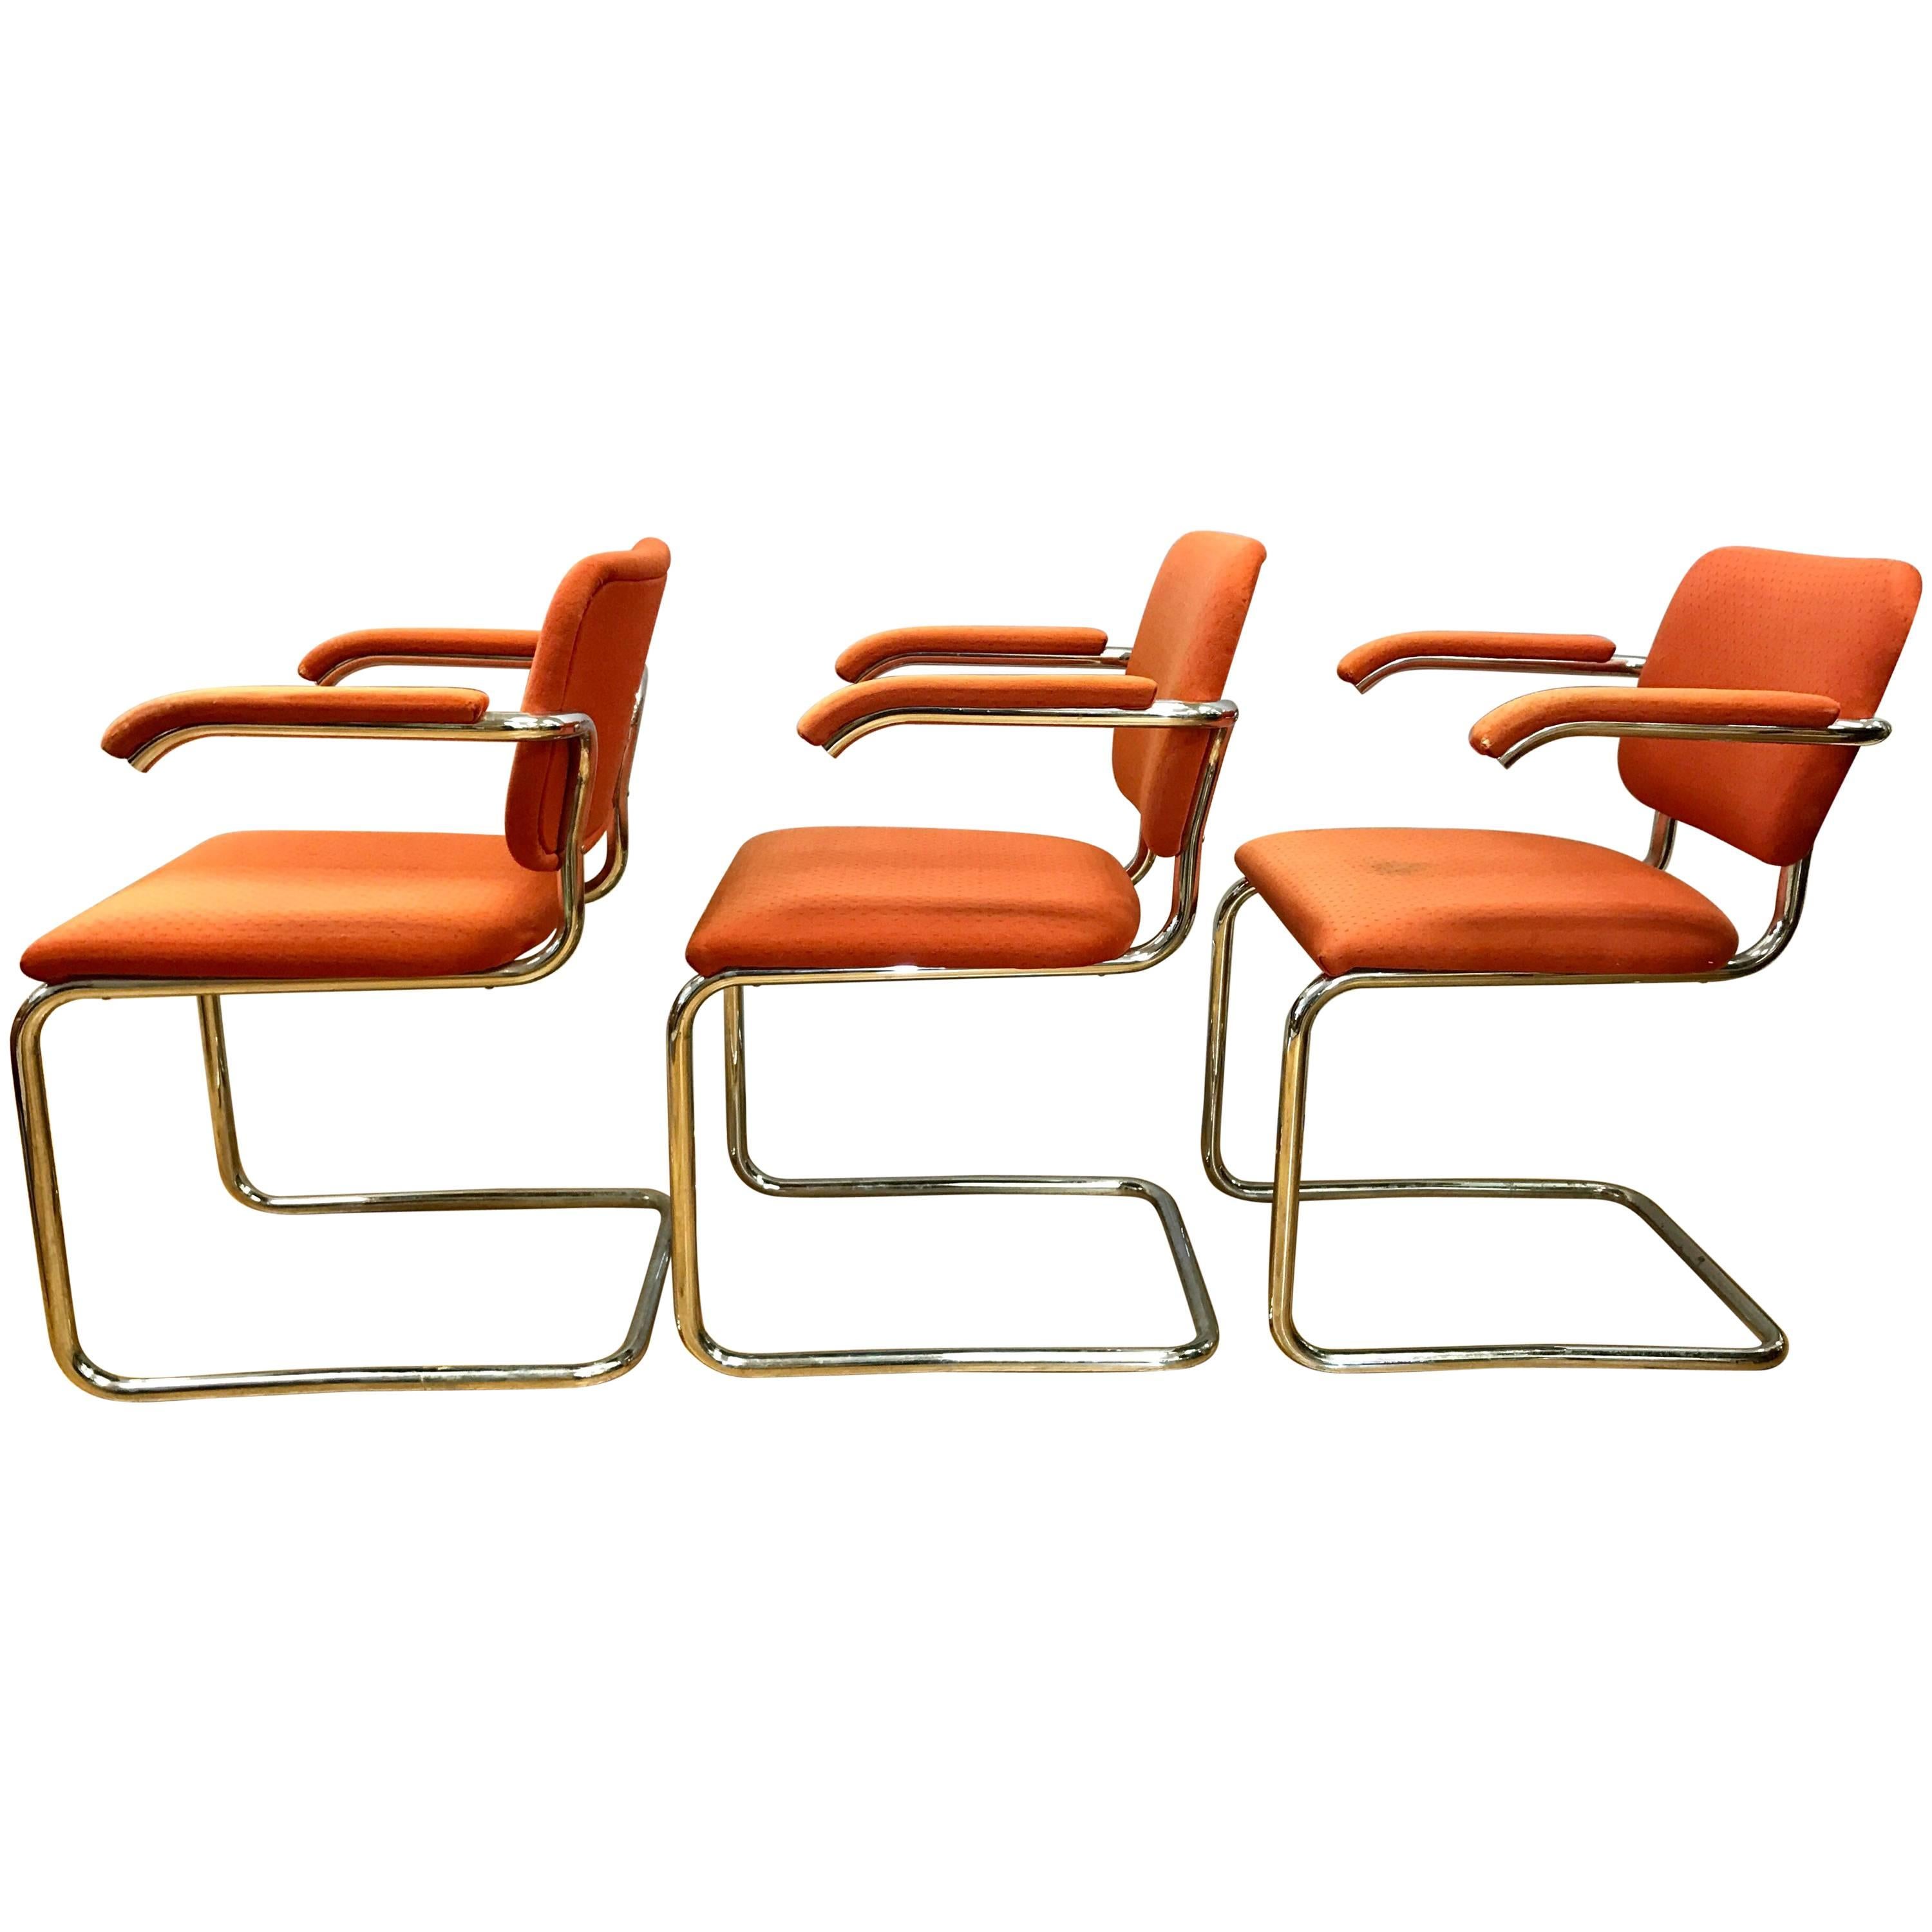 Set of Three Midcentury Knoll Chrome Cantilever Chairs